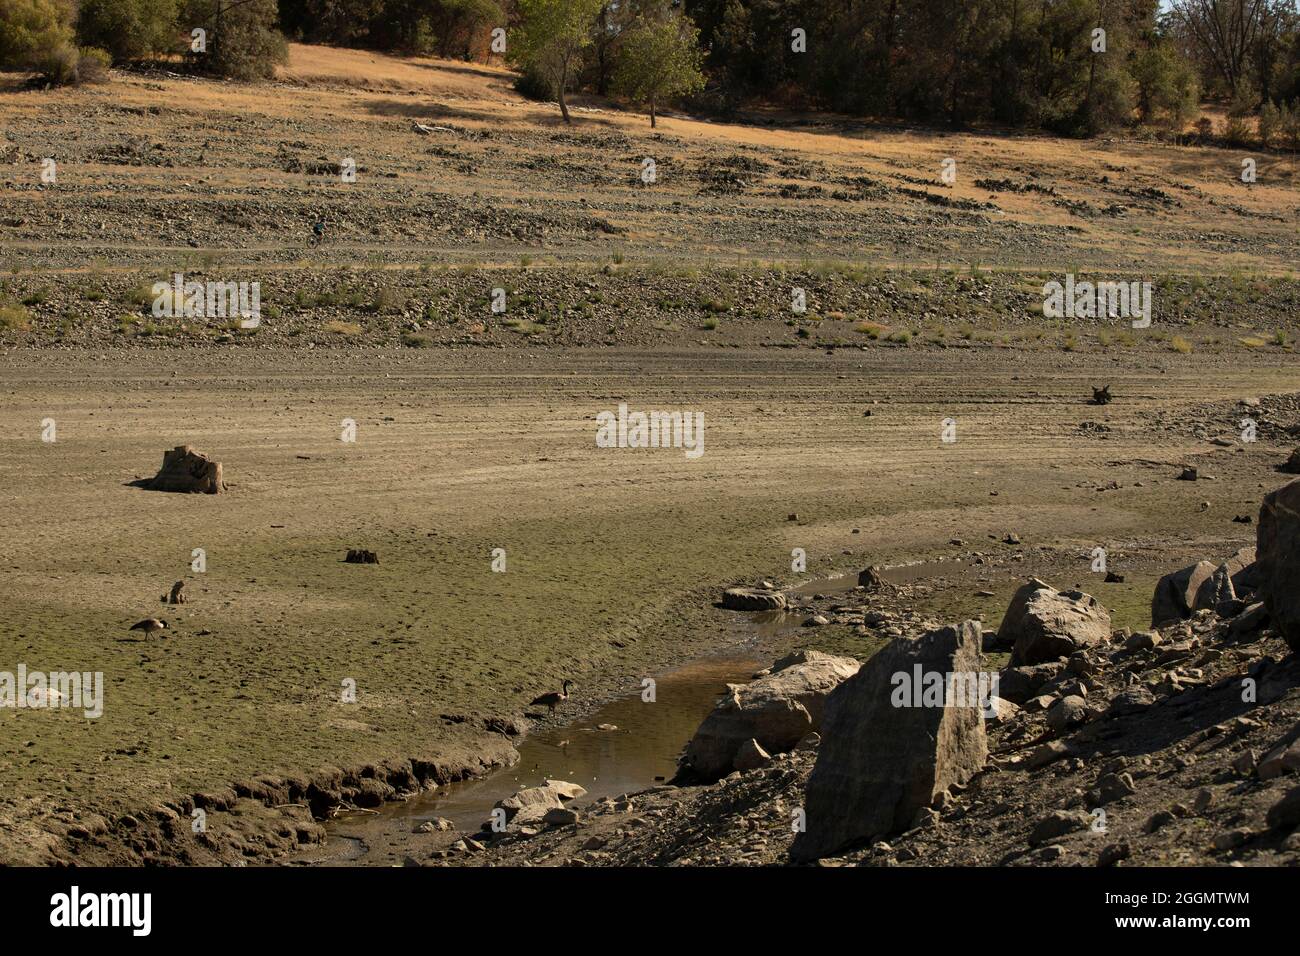 Daytime view of the severe drought conditions of Folsom Lake, a reservoir in Folsom, California, USA. Stock Photo